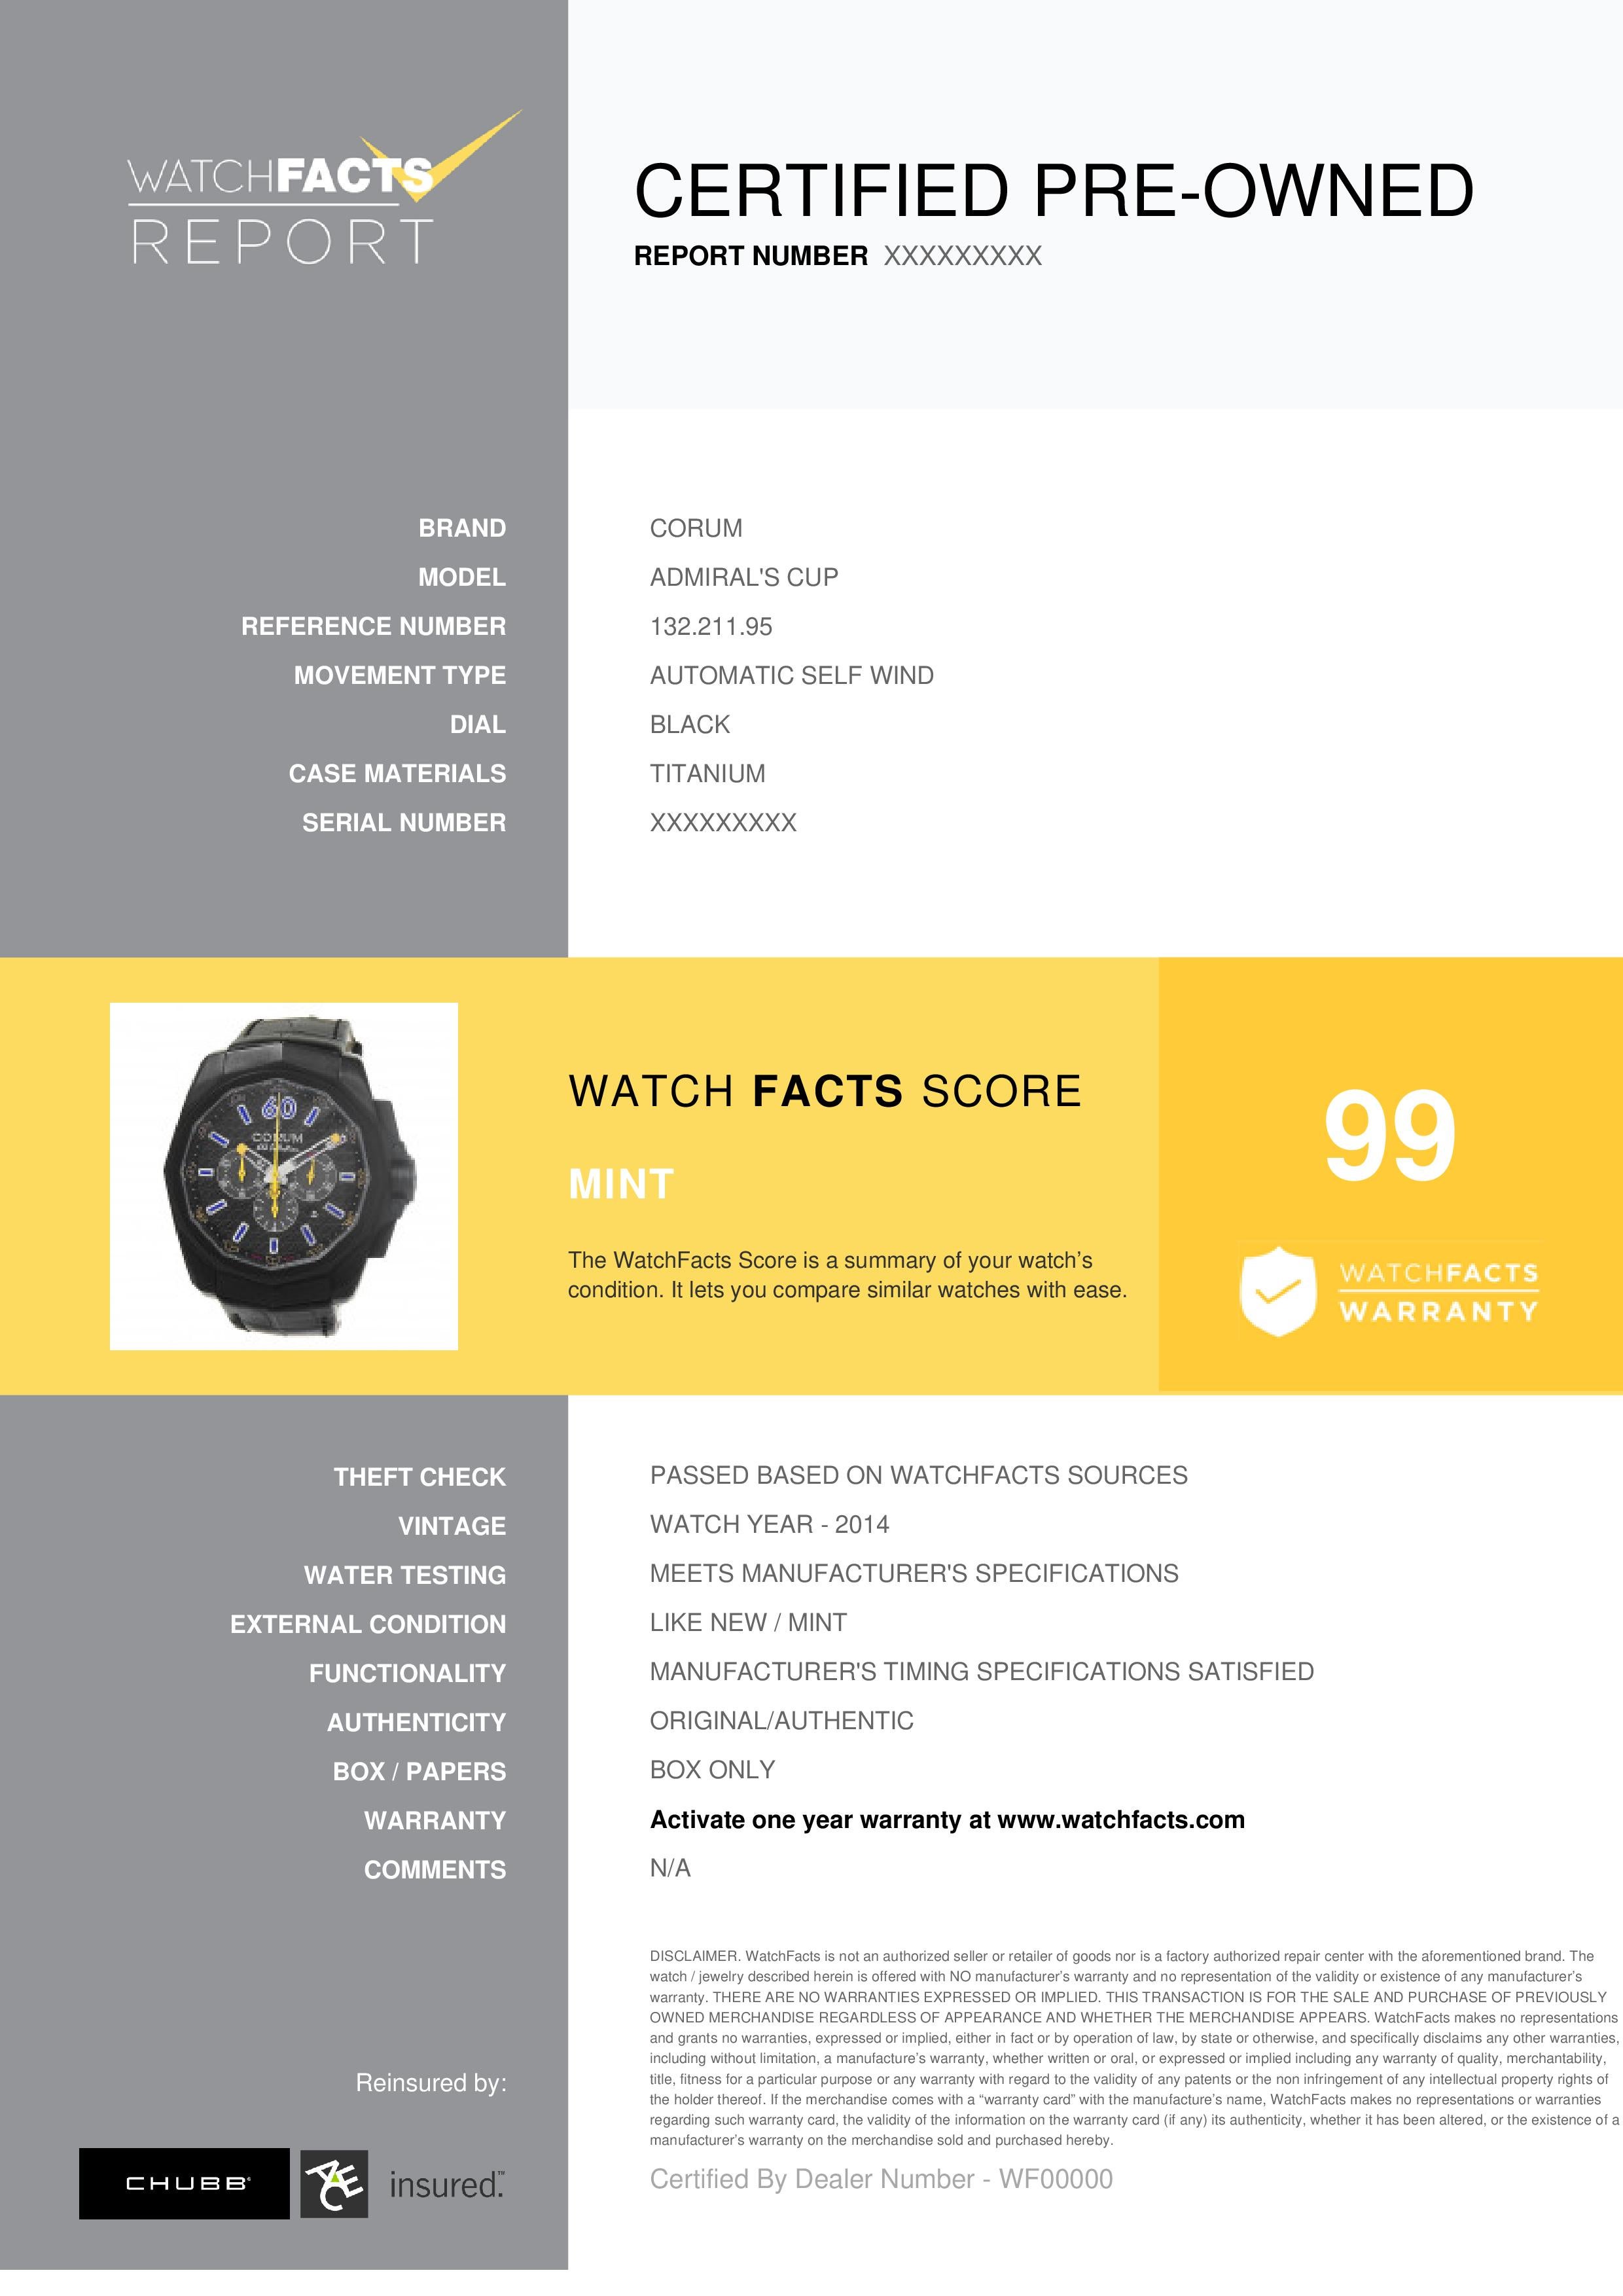 Corum Admiral's Cup Reference #: 132.211.95. Mens Automatic Self Wind Watch Titanium Black 45 MM. Verified and Certified by WatchFacts. 1 year warranty offered by WatchFacts.
